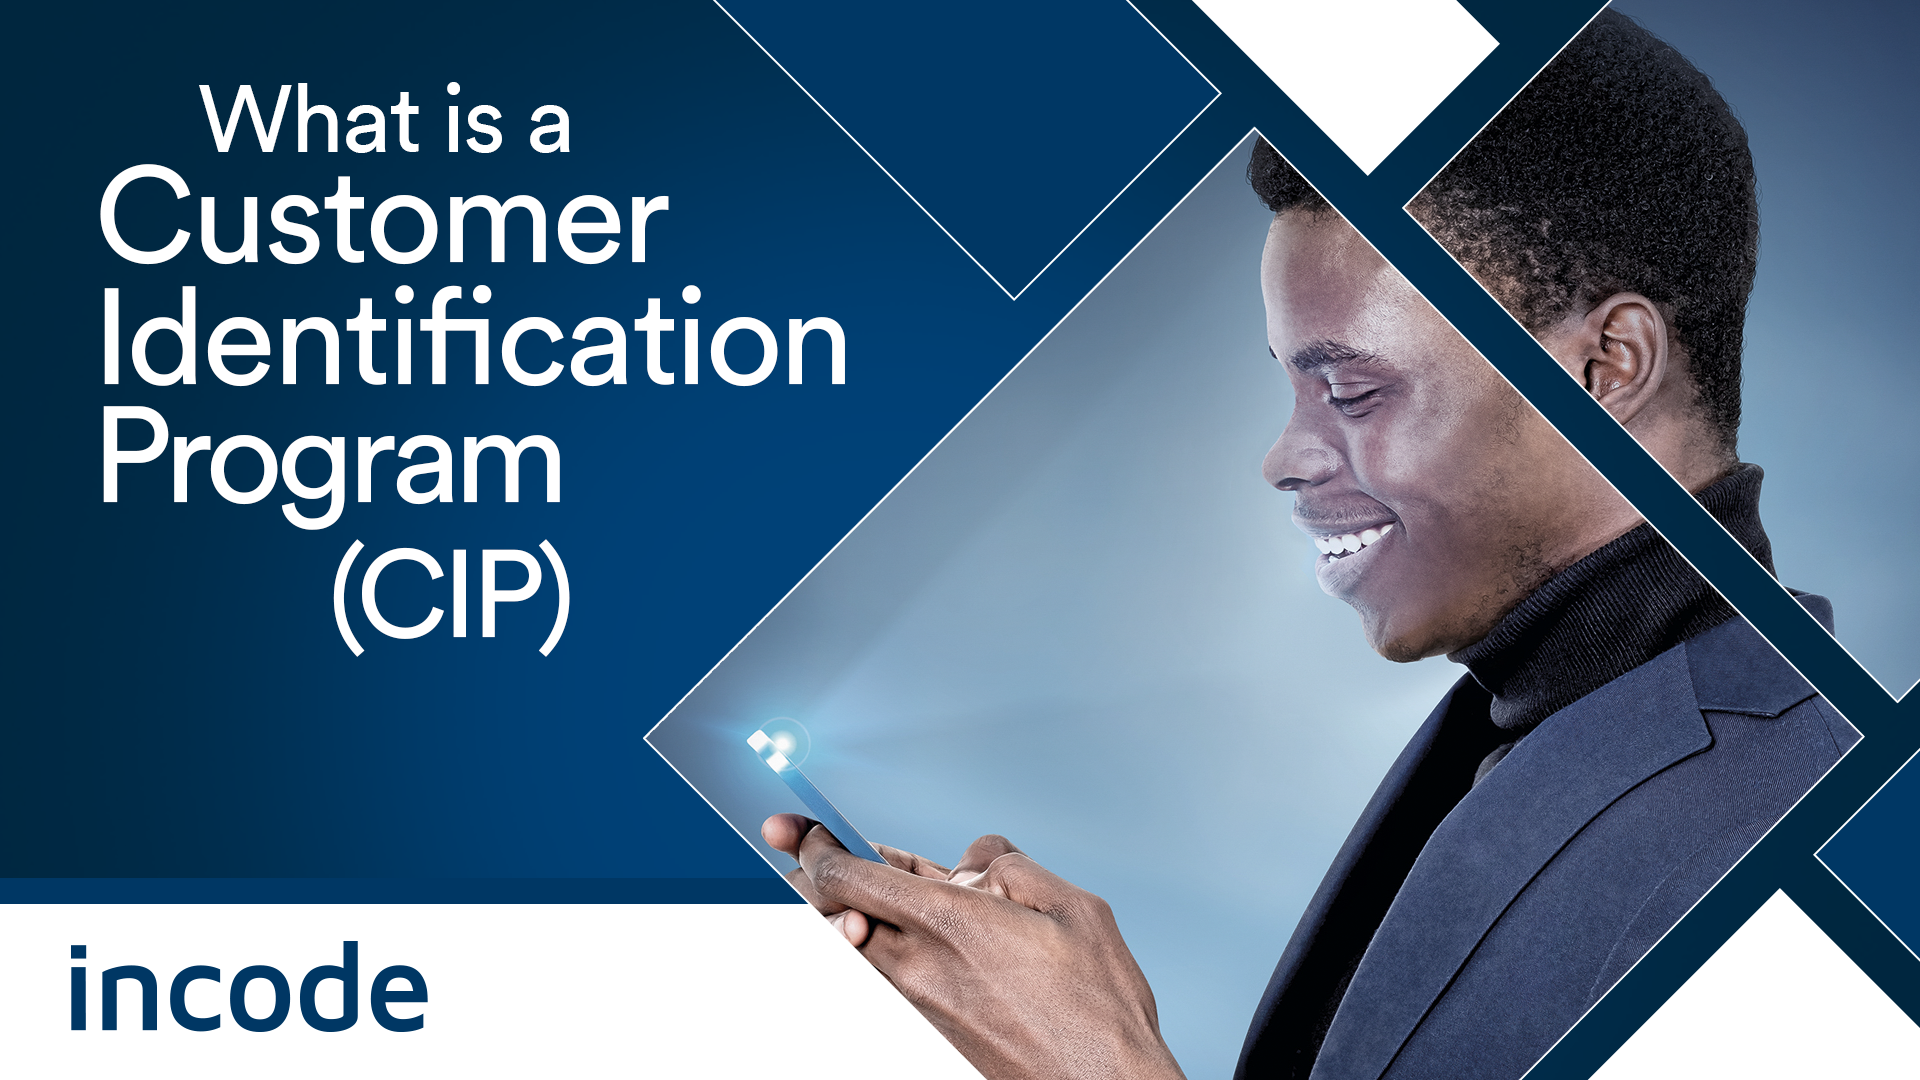 What Is a Customer Identification Program (CIP)